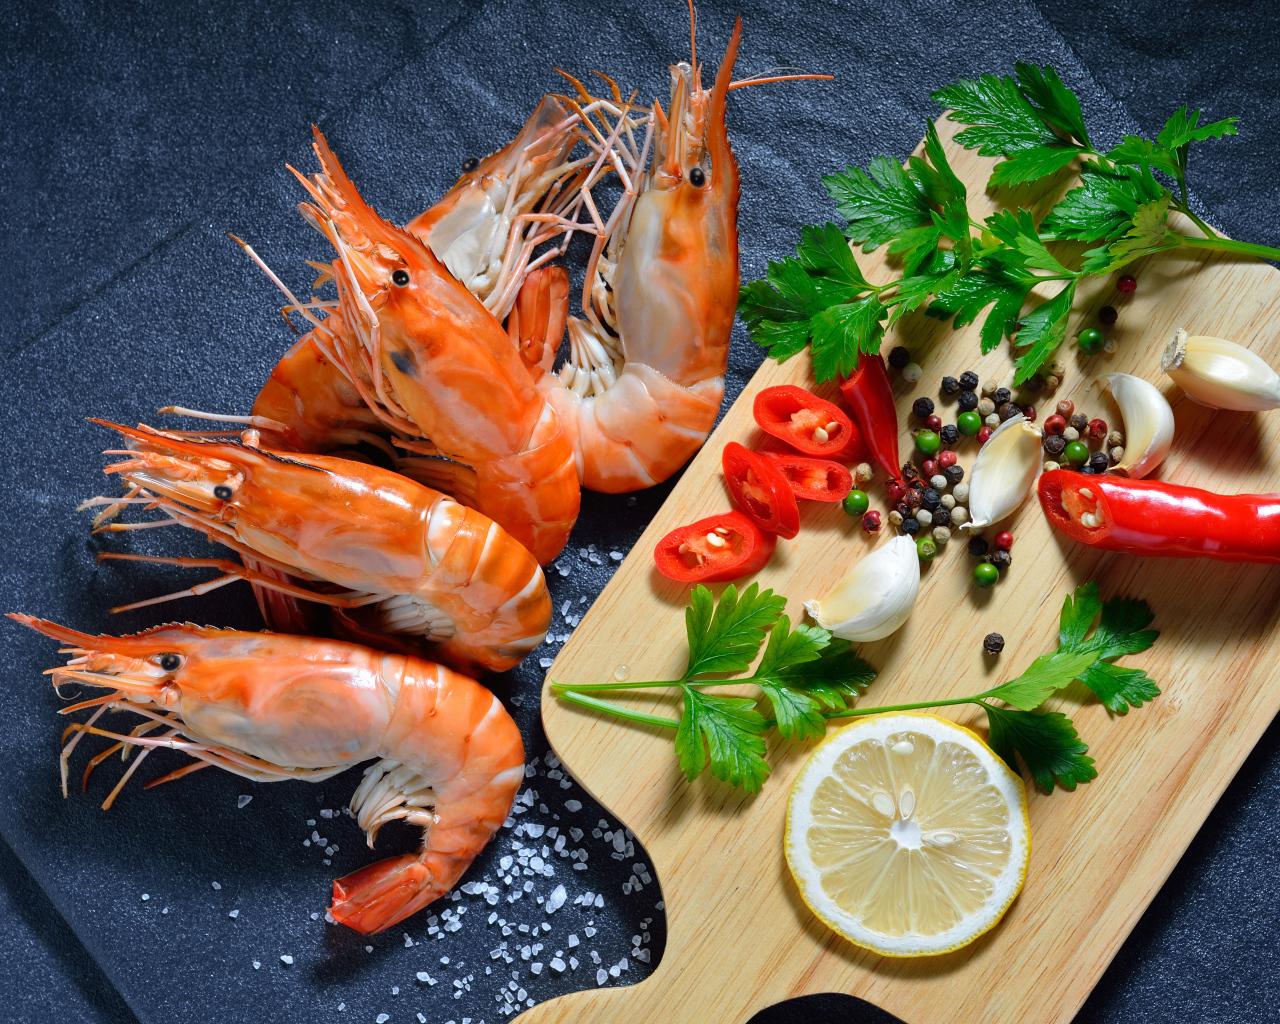 Boiled shrimps on the table with spices and herbs